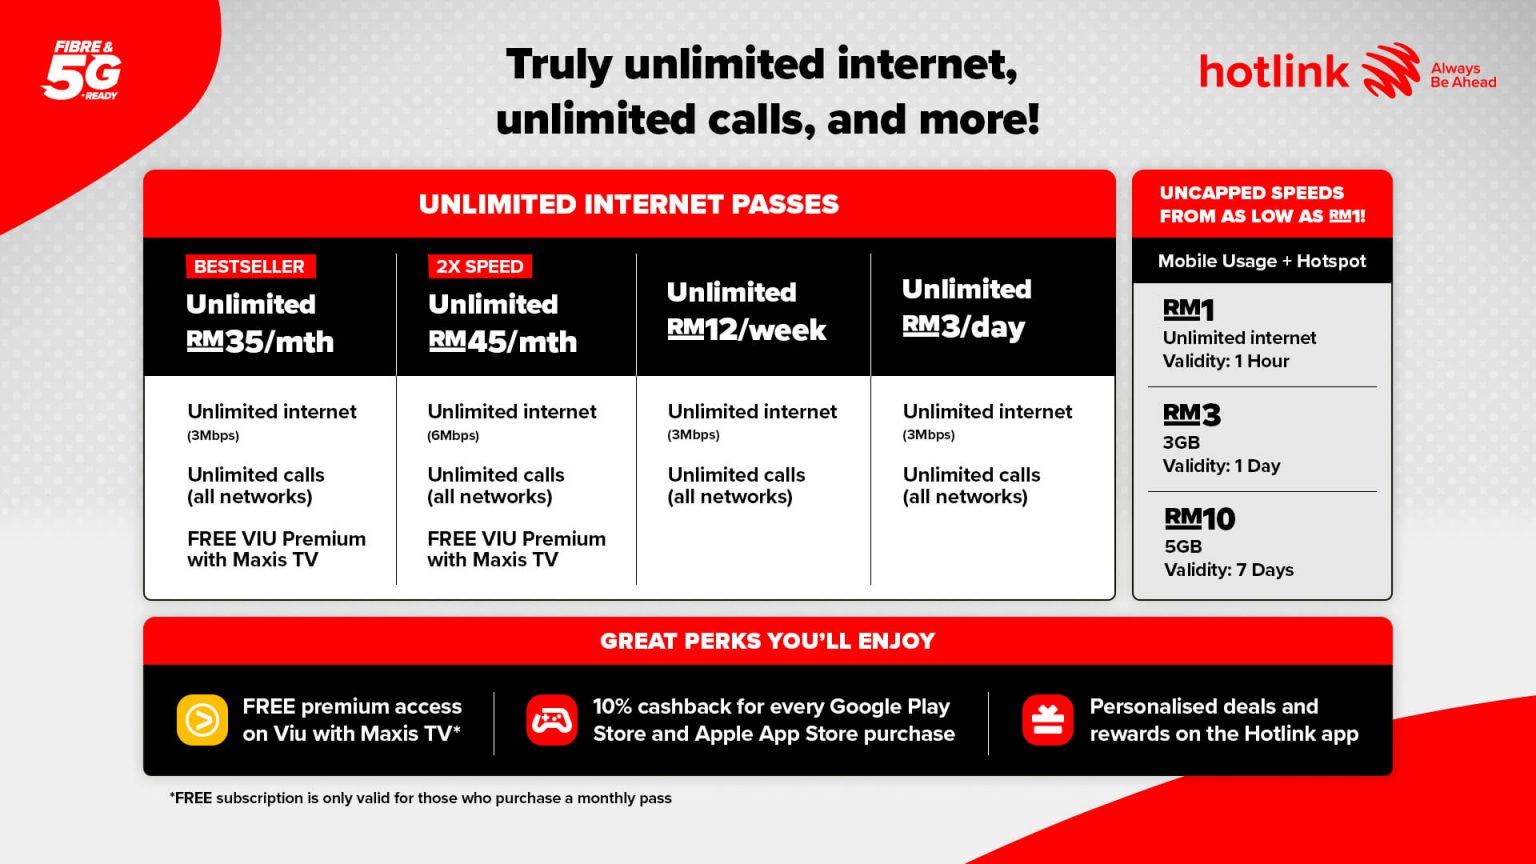 Hotlink Prepaid Unlimited Internet & Unlimited Calls - RM35/month